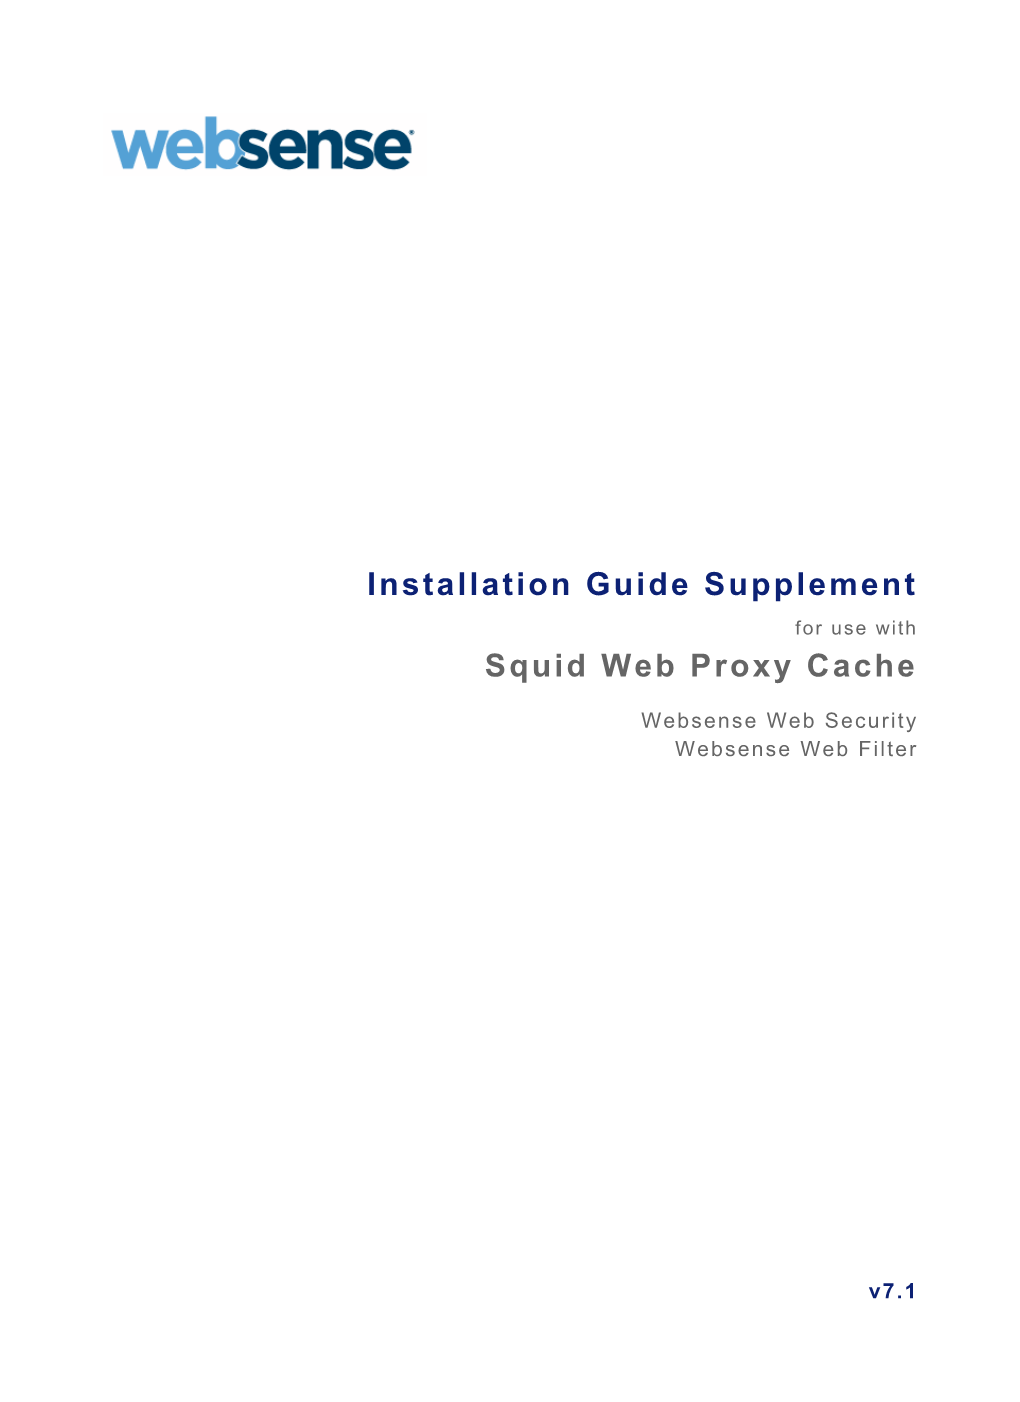 Install Guide Supplement for Use with Squid Web Proxy Cache